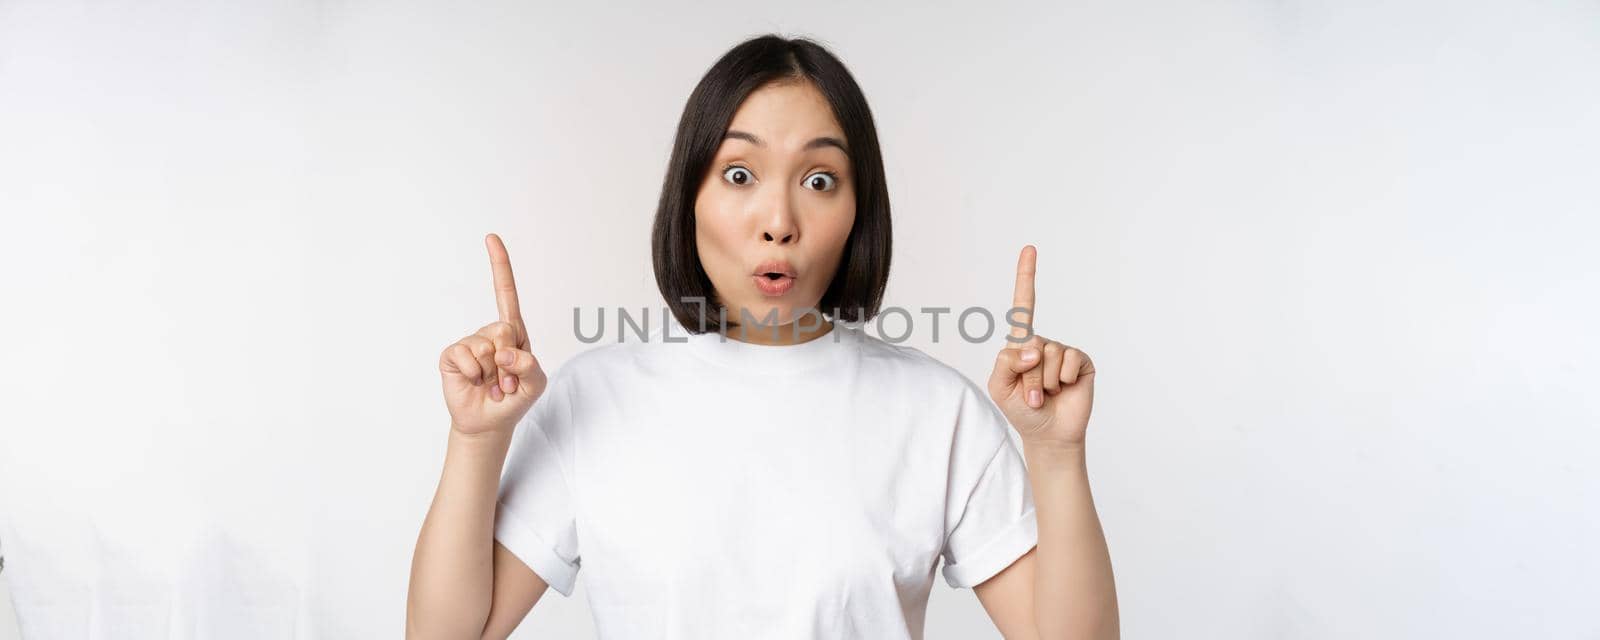 Portrait of enthusiastic young woman, asian girl smiling pointing fingers up, showing advertisement upwards, standing over white background.